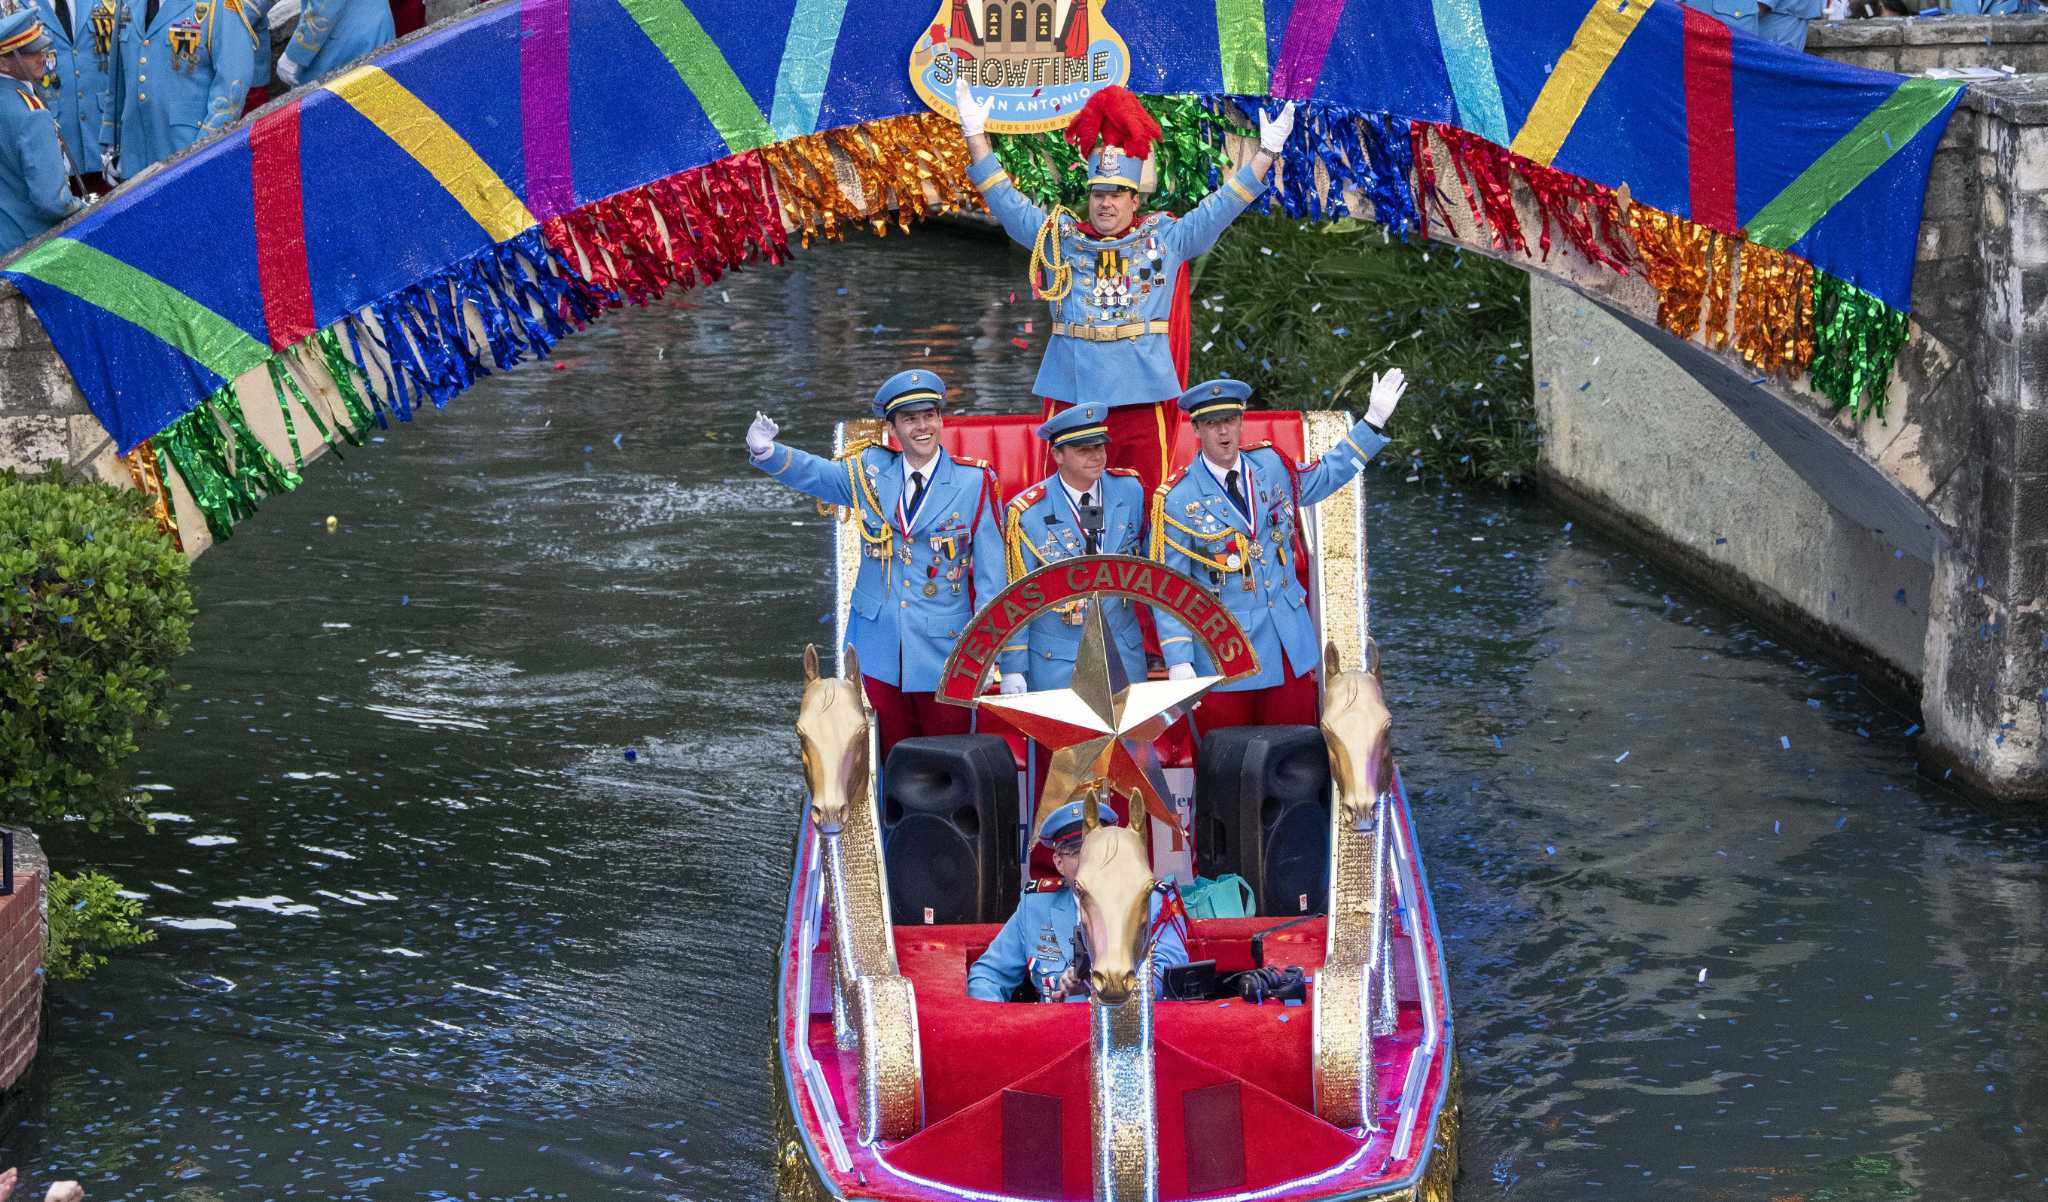 Texas Cavaliers River Parade and CityWide Porch Parade keep Fiesta